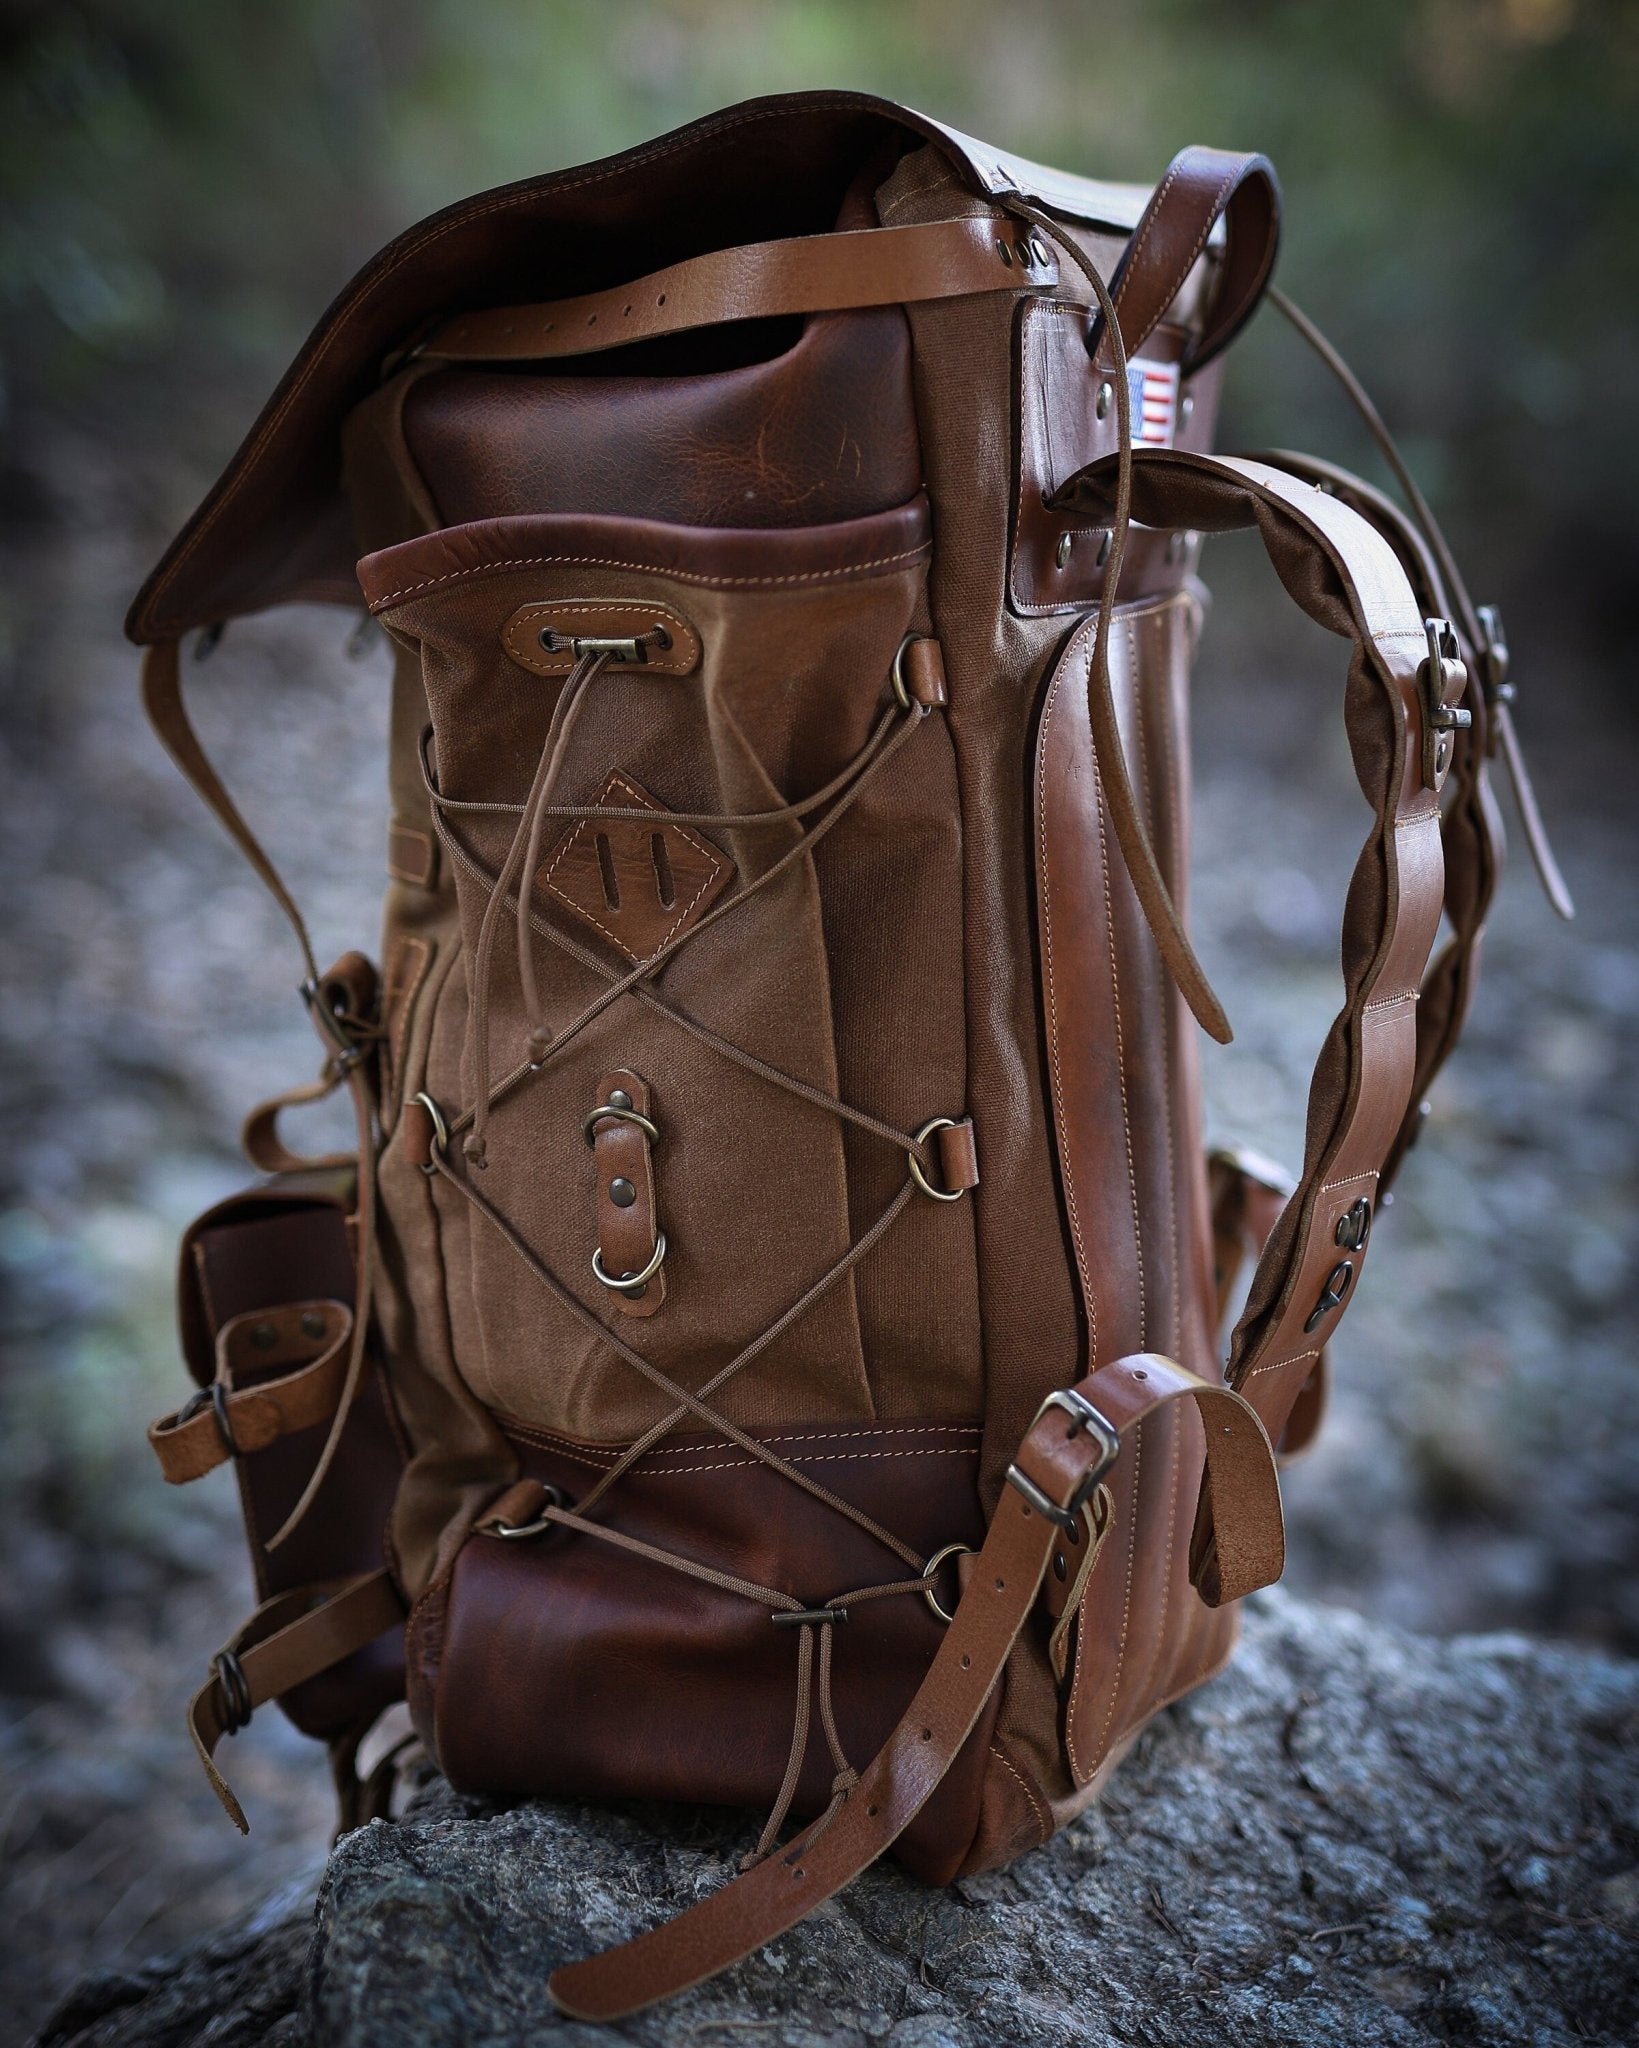 Handmade Leather Backpack | Brown | Waxed Canvas Backpack | Bushcraft Backpack | Travel, Camping, Hiking | Personalization for your request bushcraft - camping - hiking backpack 99percenthandmade   